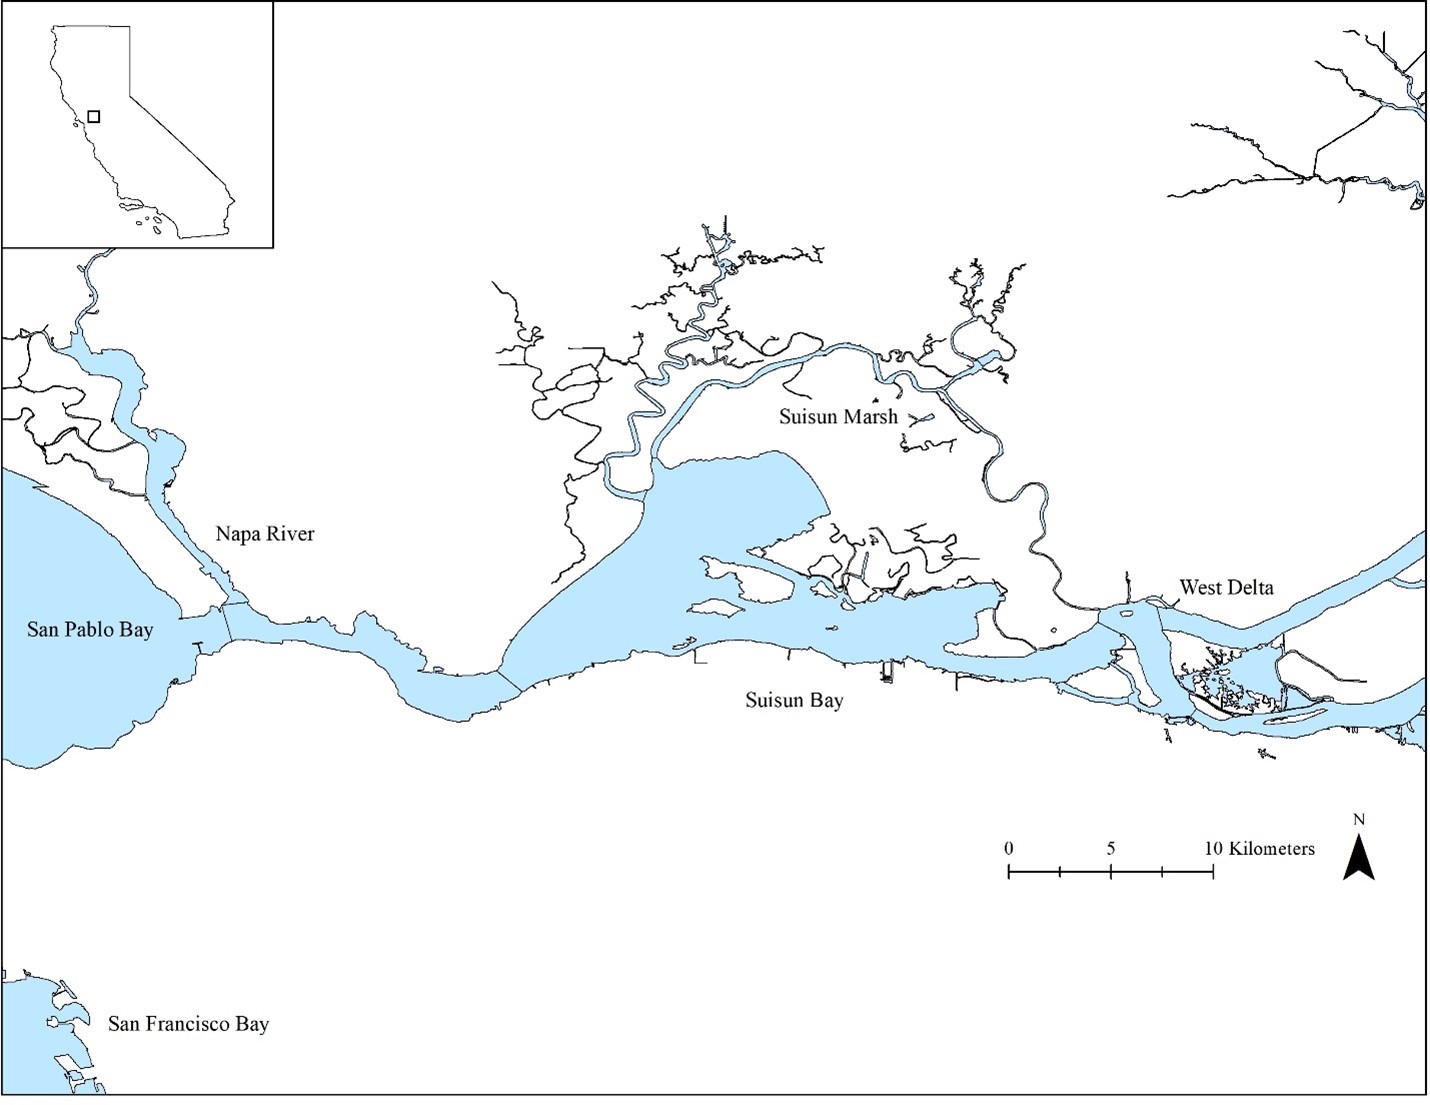 Map of the San Francisco Estuary showing the 5 regions used in this study. San Pablo Bay is the most marine influenced region and the West Delta is the most freshwater influenced.